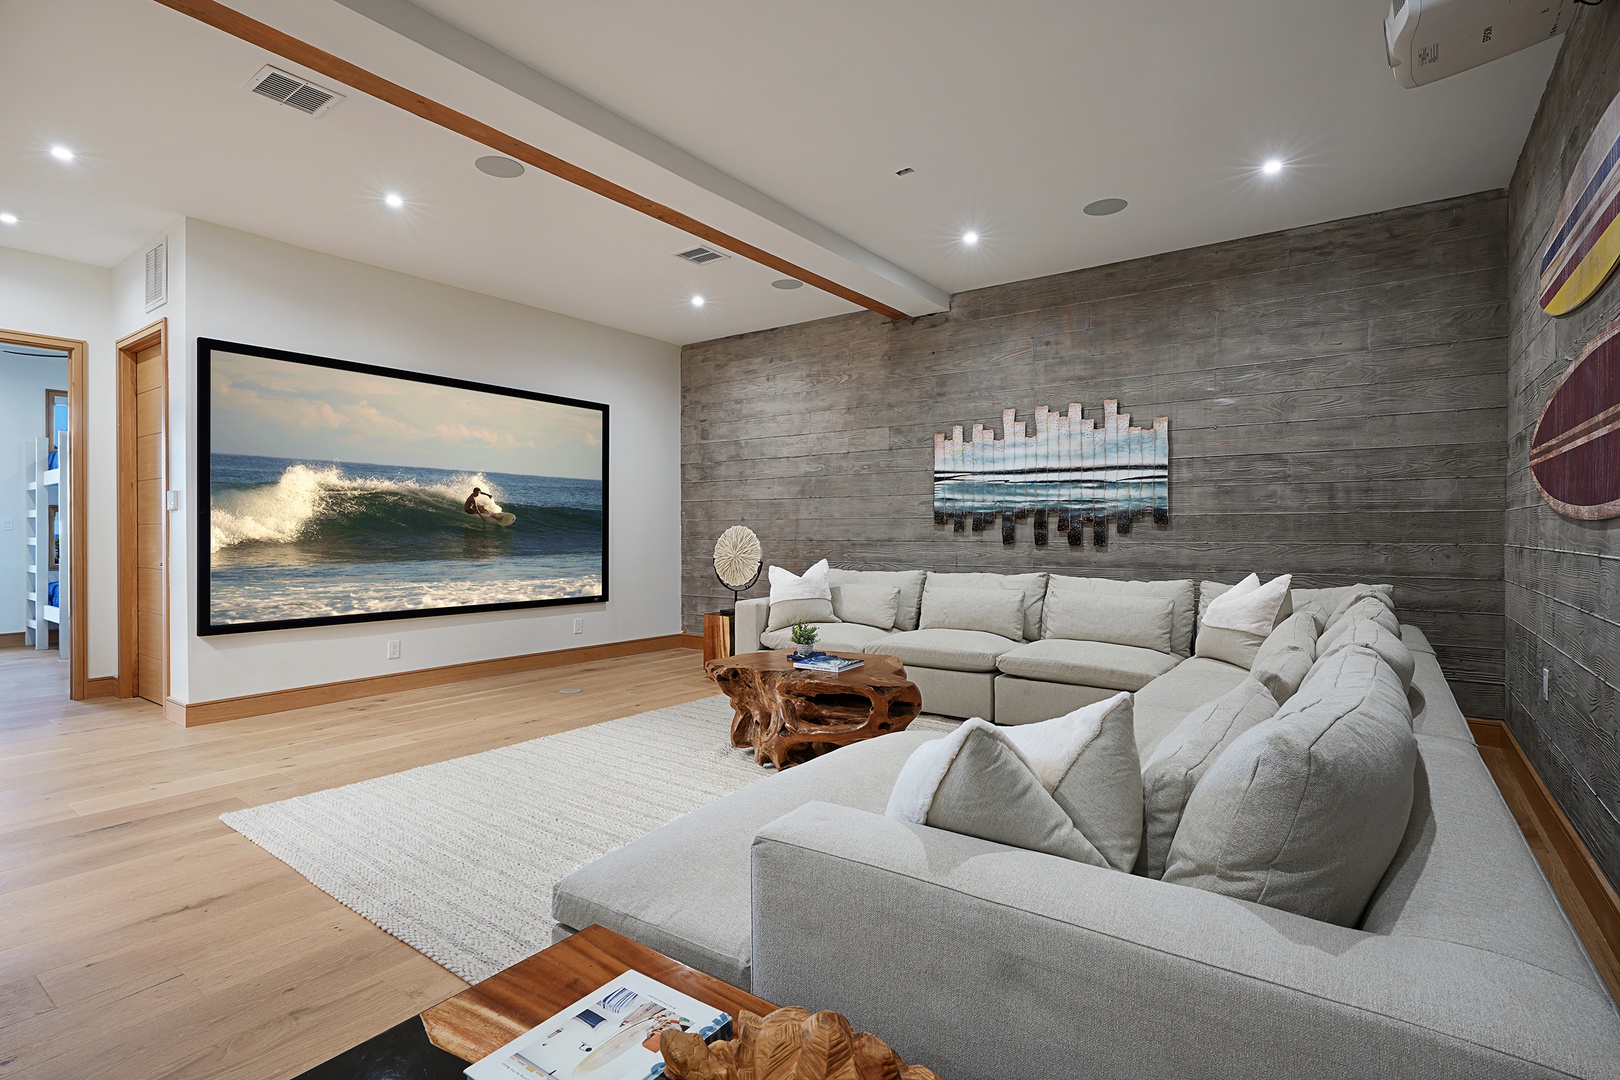 Koloa Vacation Rentals, Hale Keaka at Kukui'ula - Entertain and unwind in our downstairs theater room, complete with a game area for endless fun and relaxation.